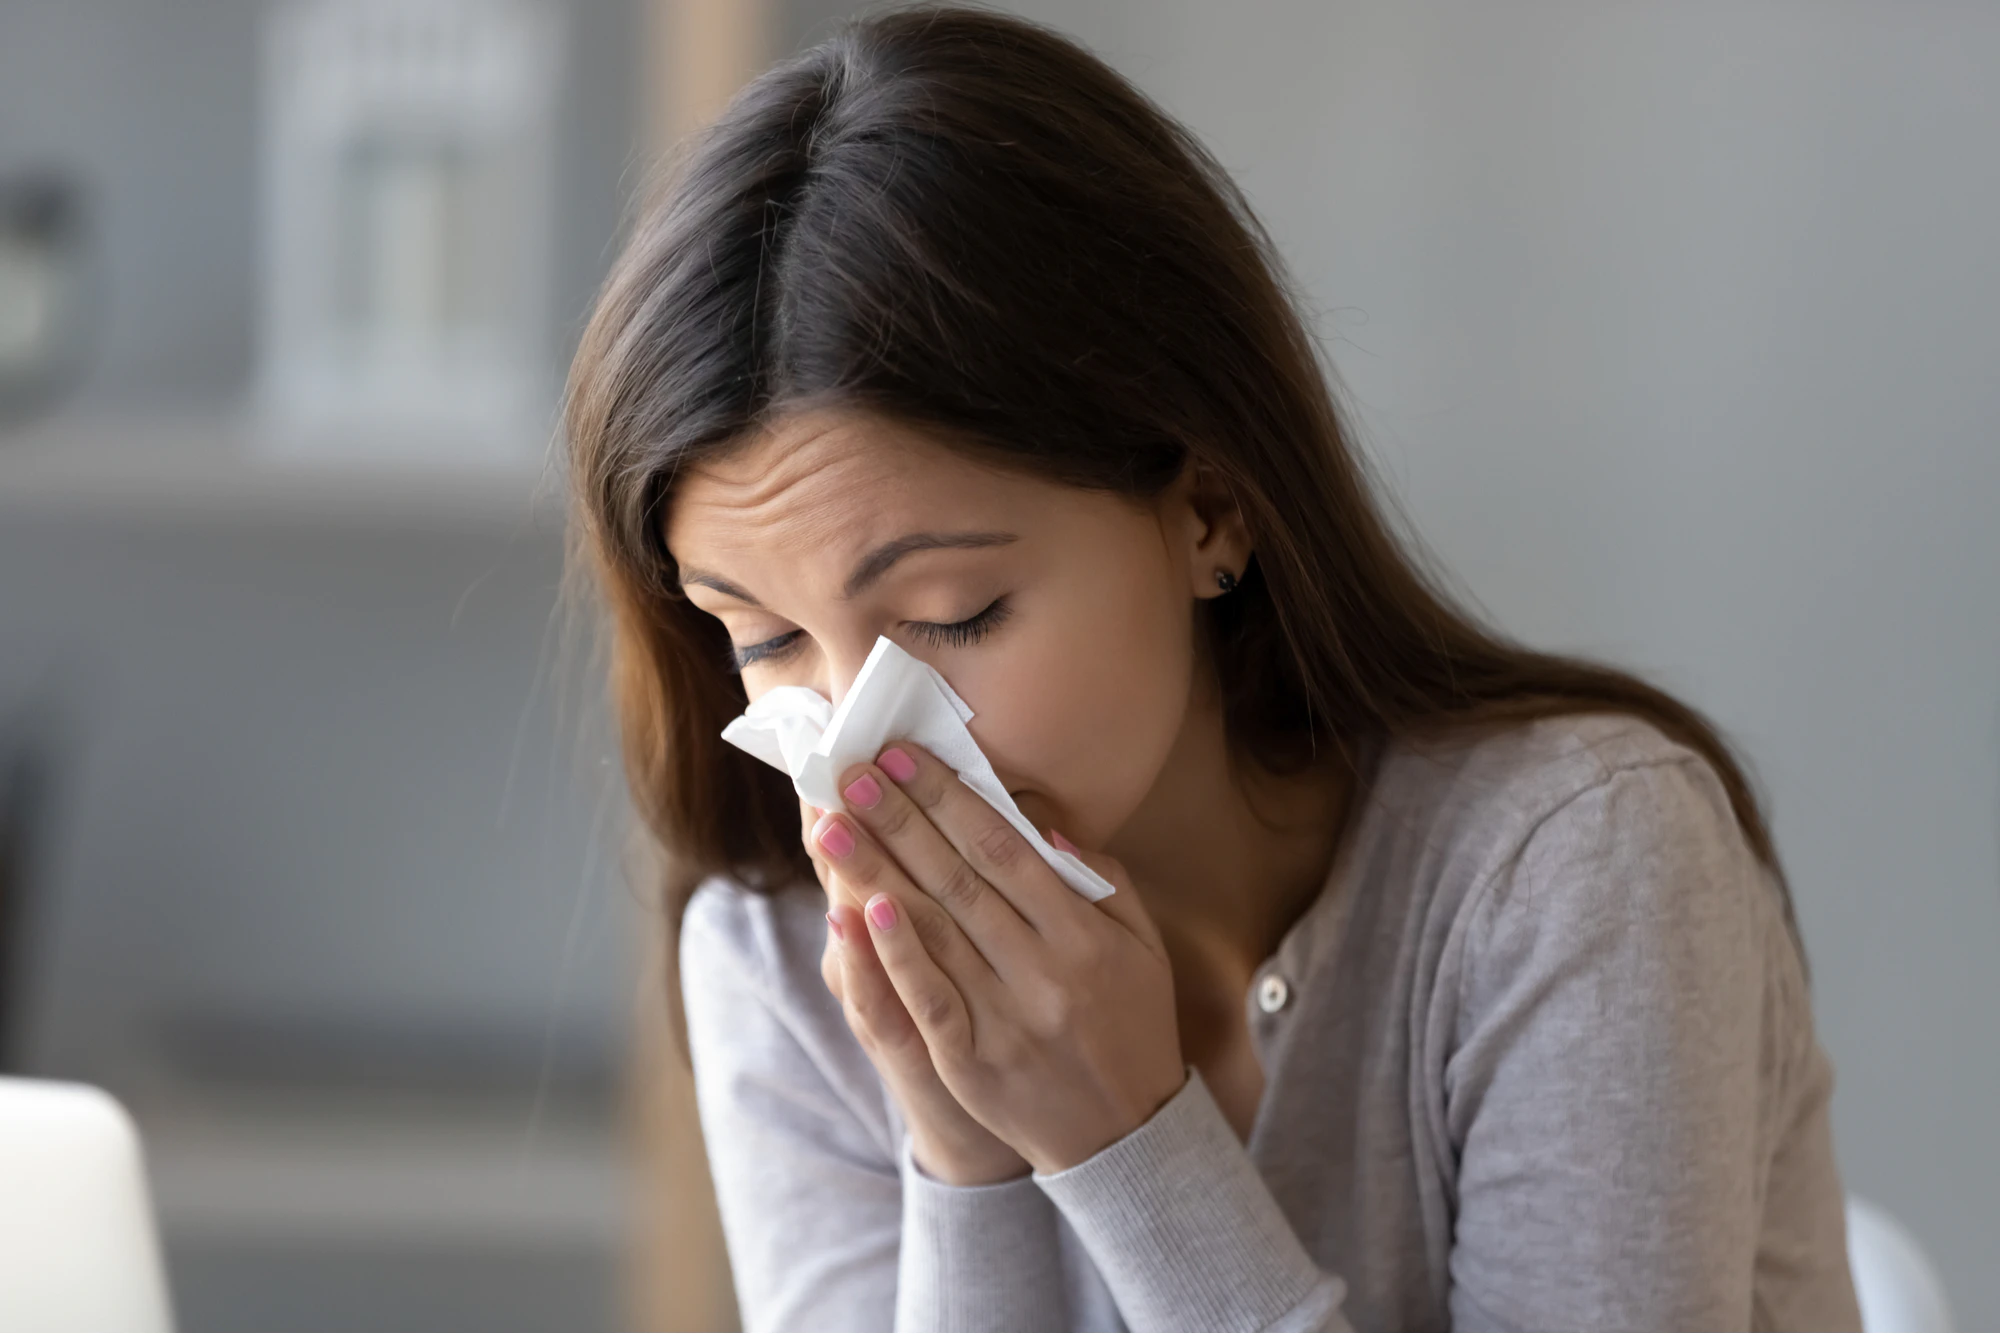 How to Stop a Runny Nose Fast Without Medicine – Effective Methods